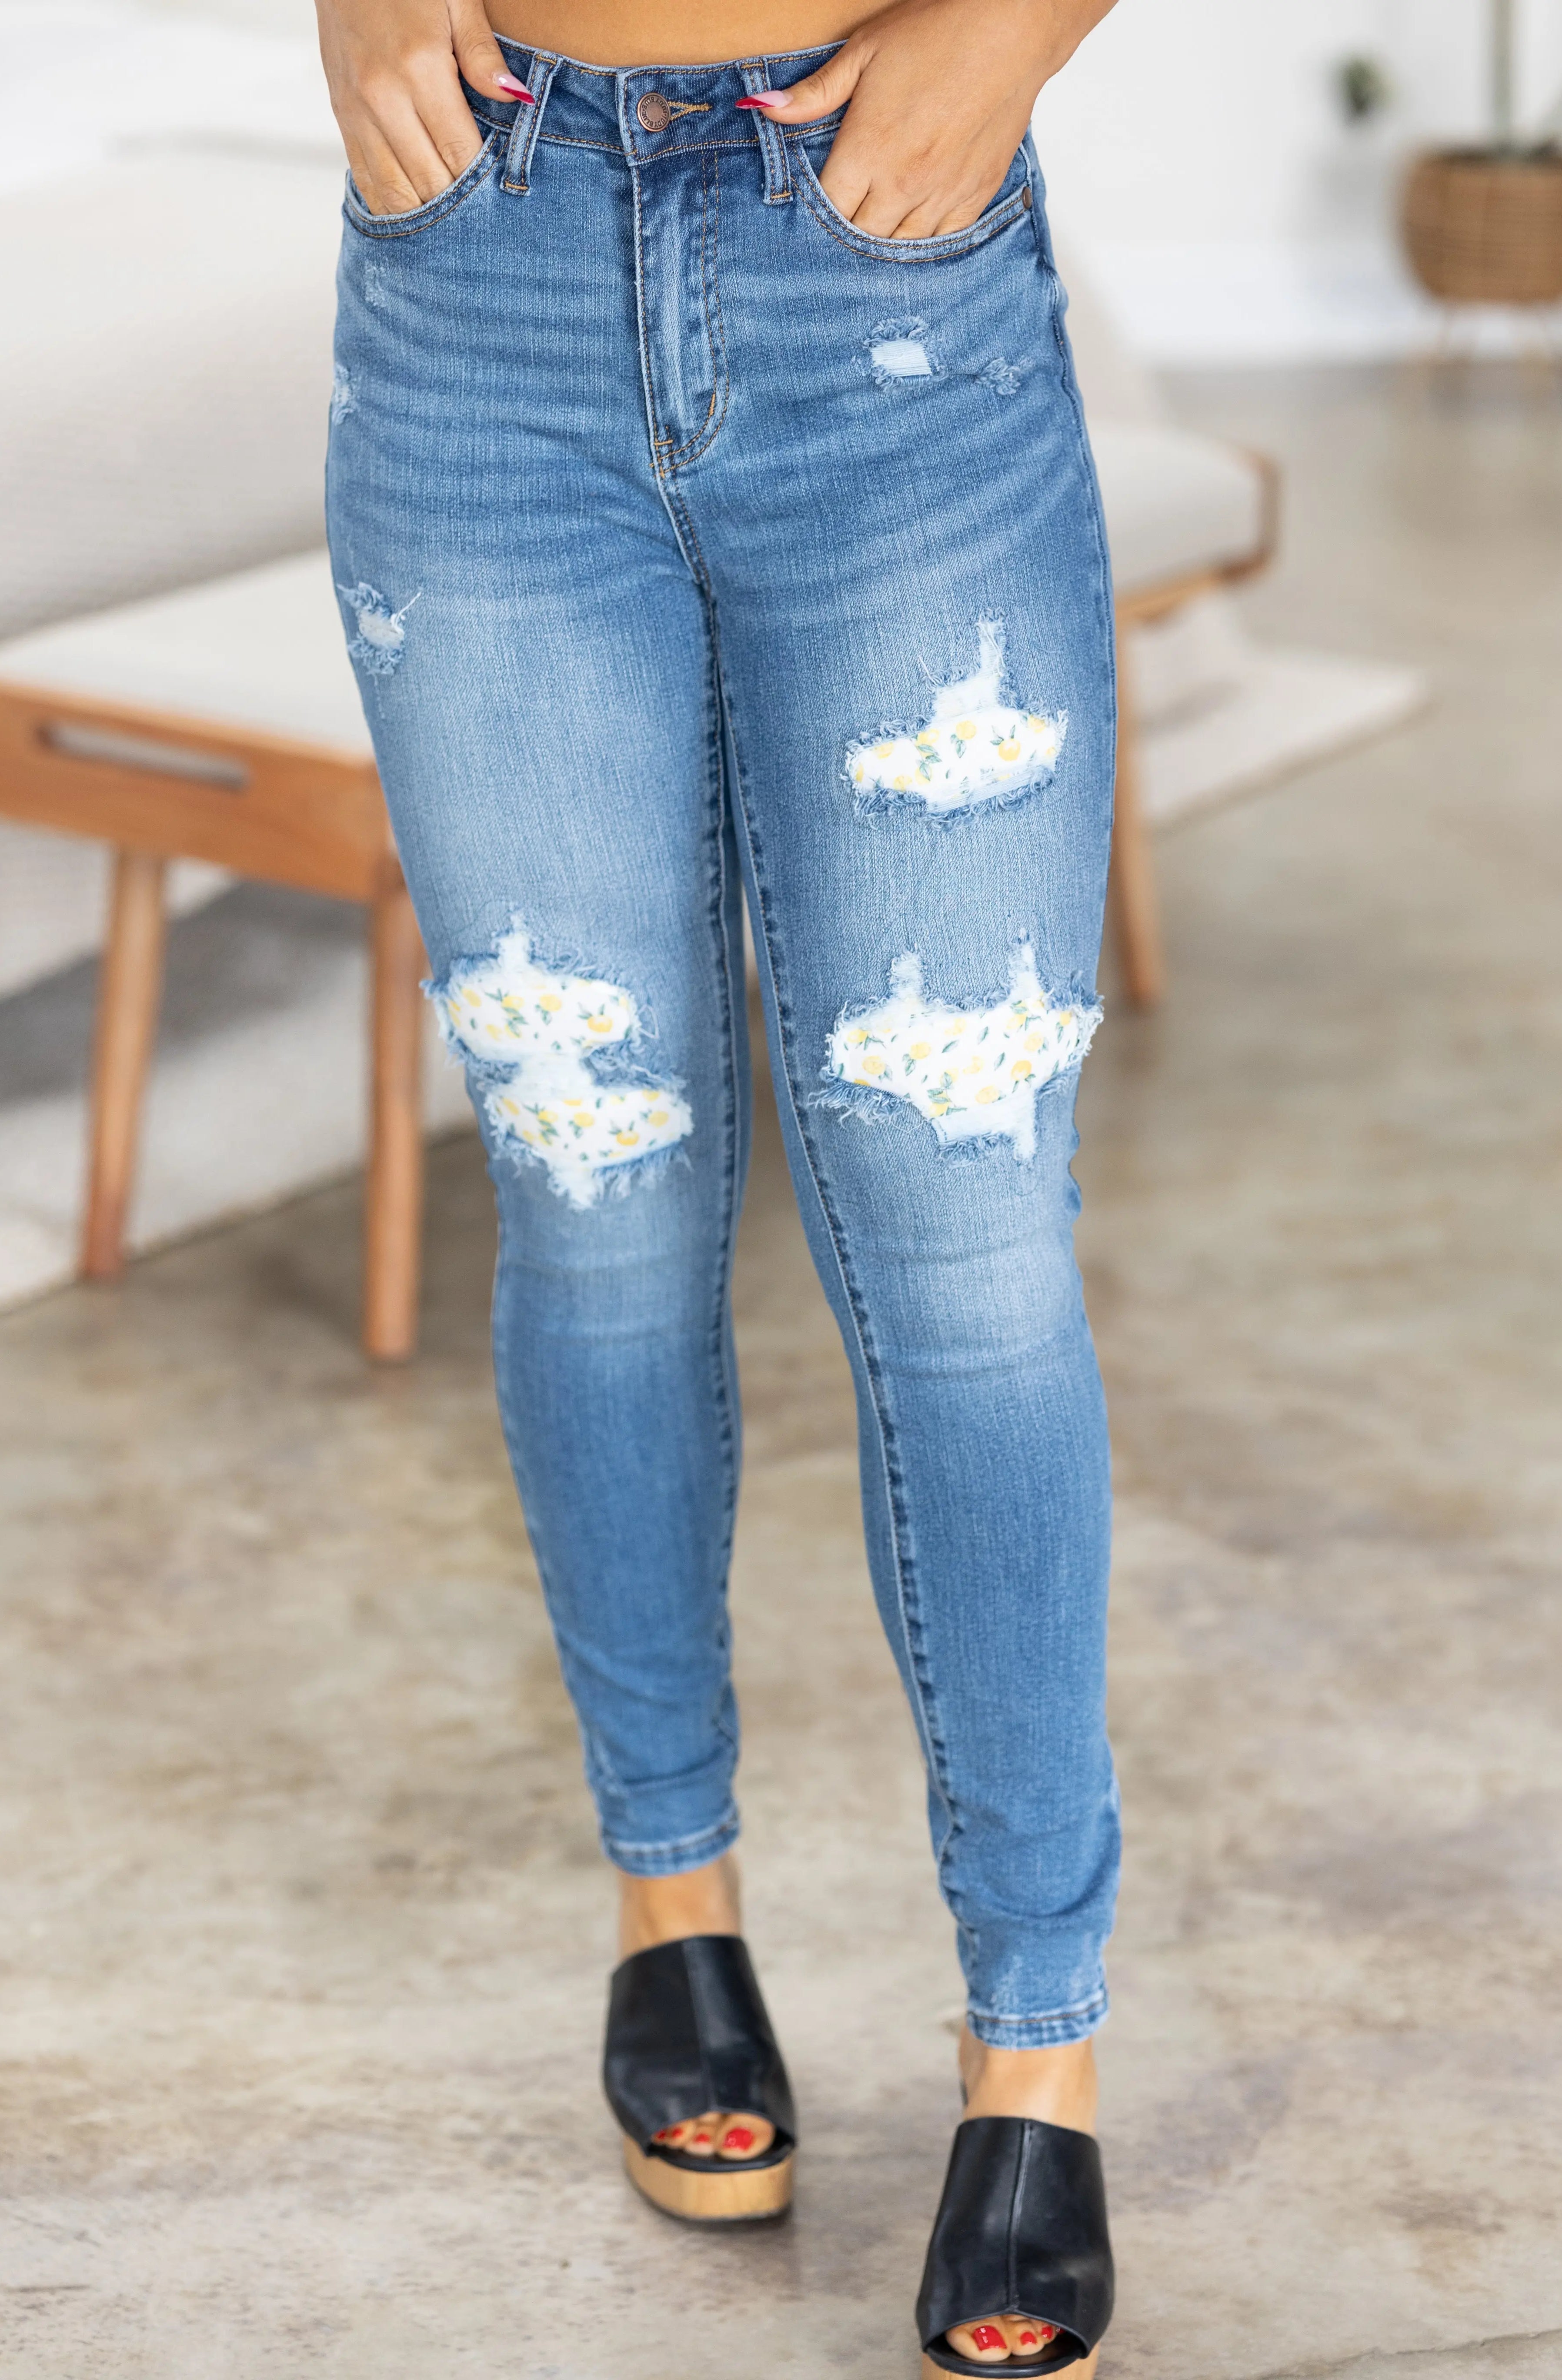 Lemon Drops Judy Blue Patched Skinnies JB Boutique Simplified